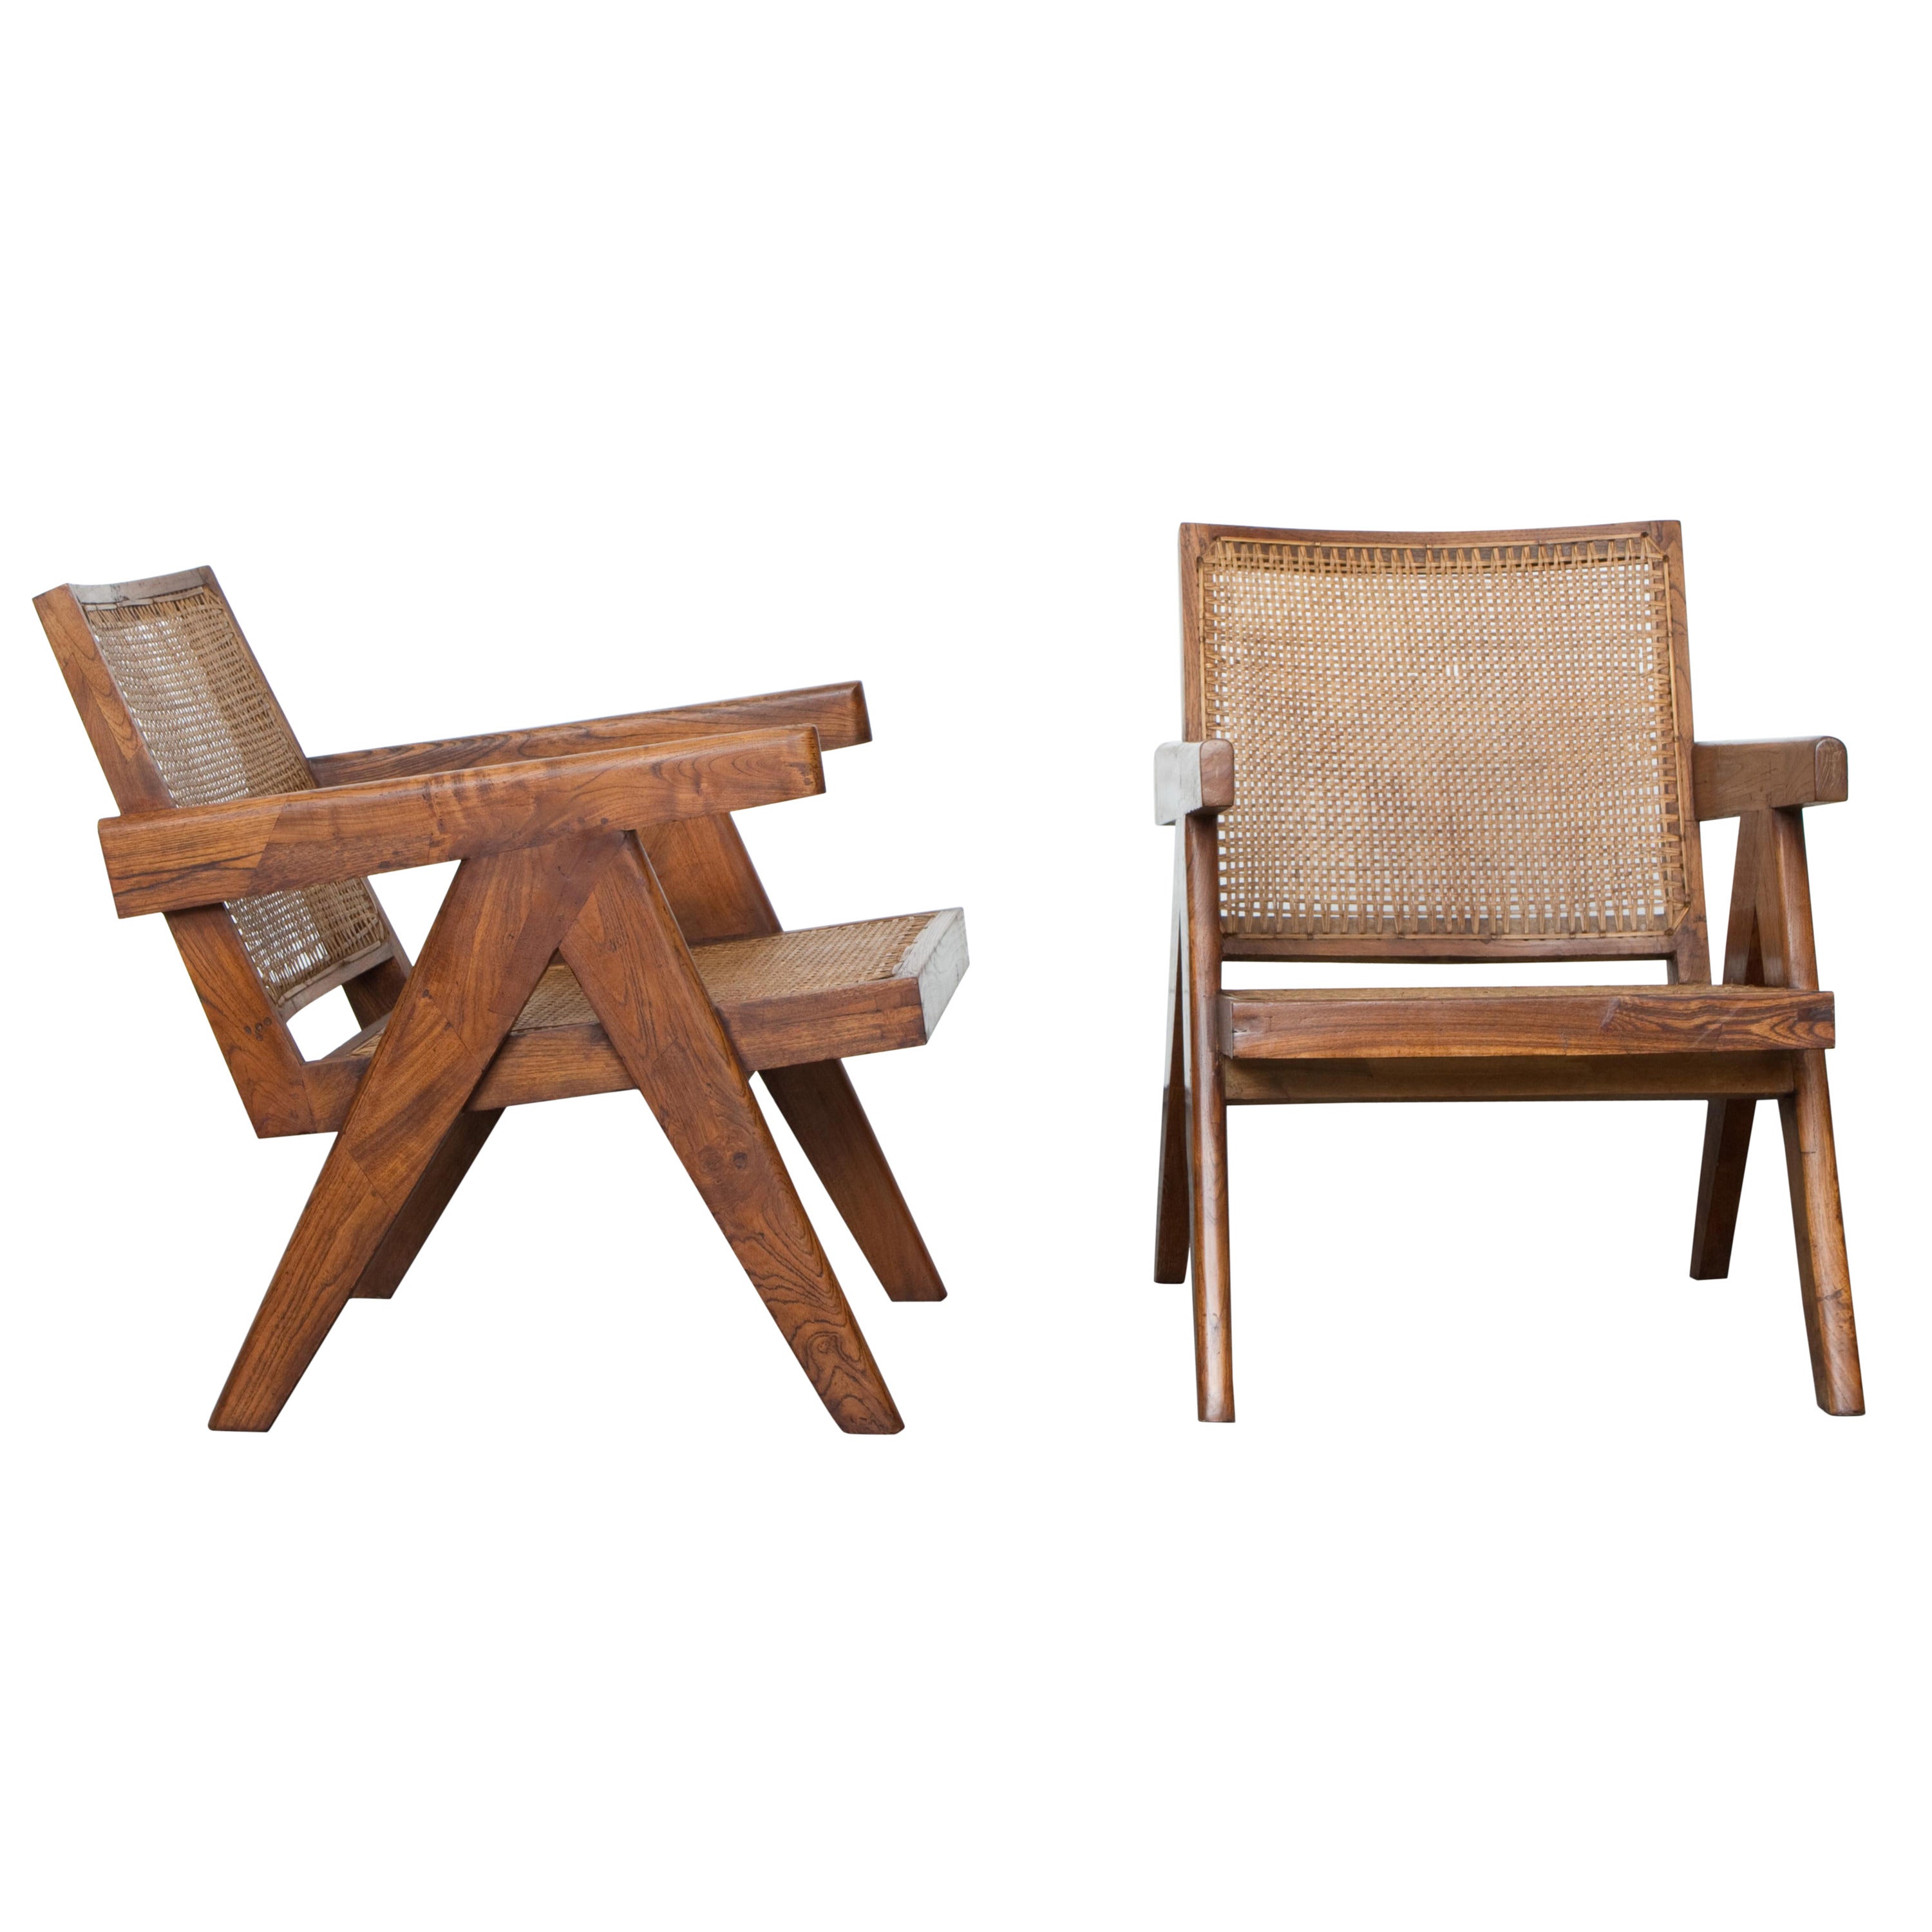 Pierre Jeanneret Pair of Lounge Chairs, circa 1955 For Sale